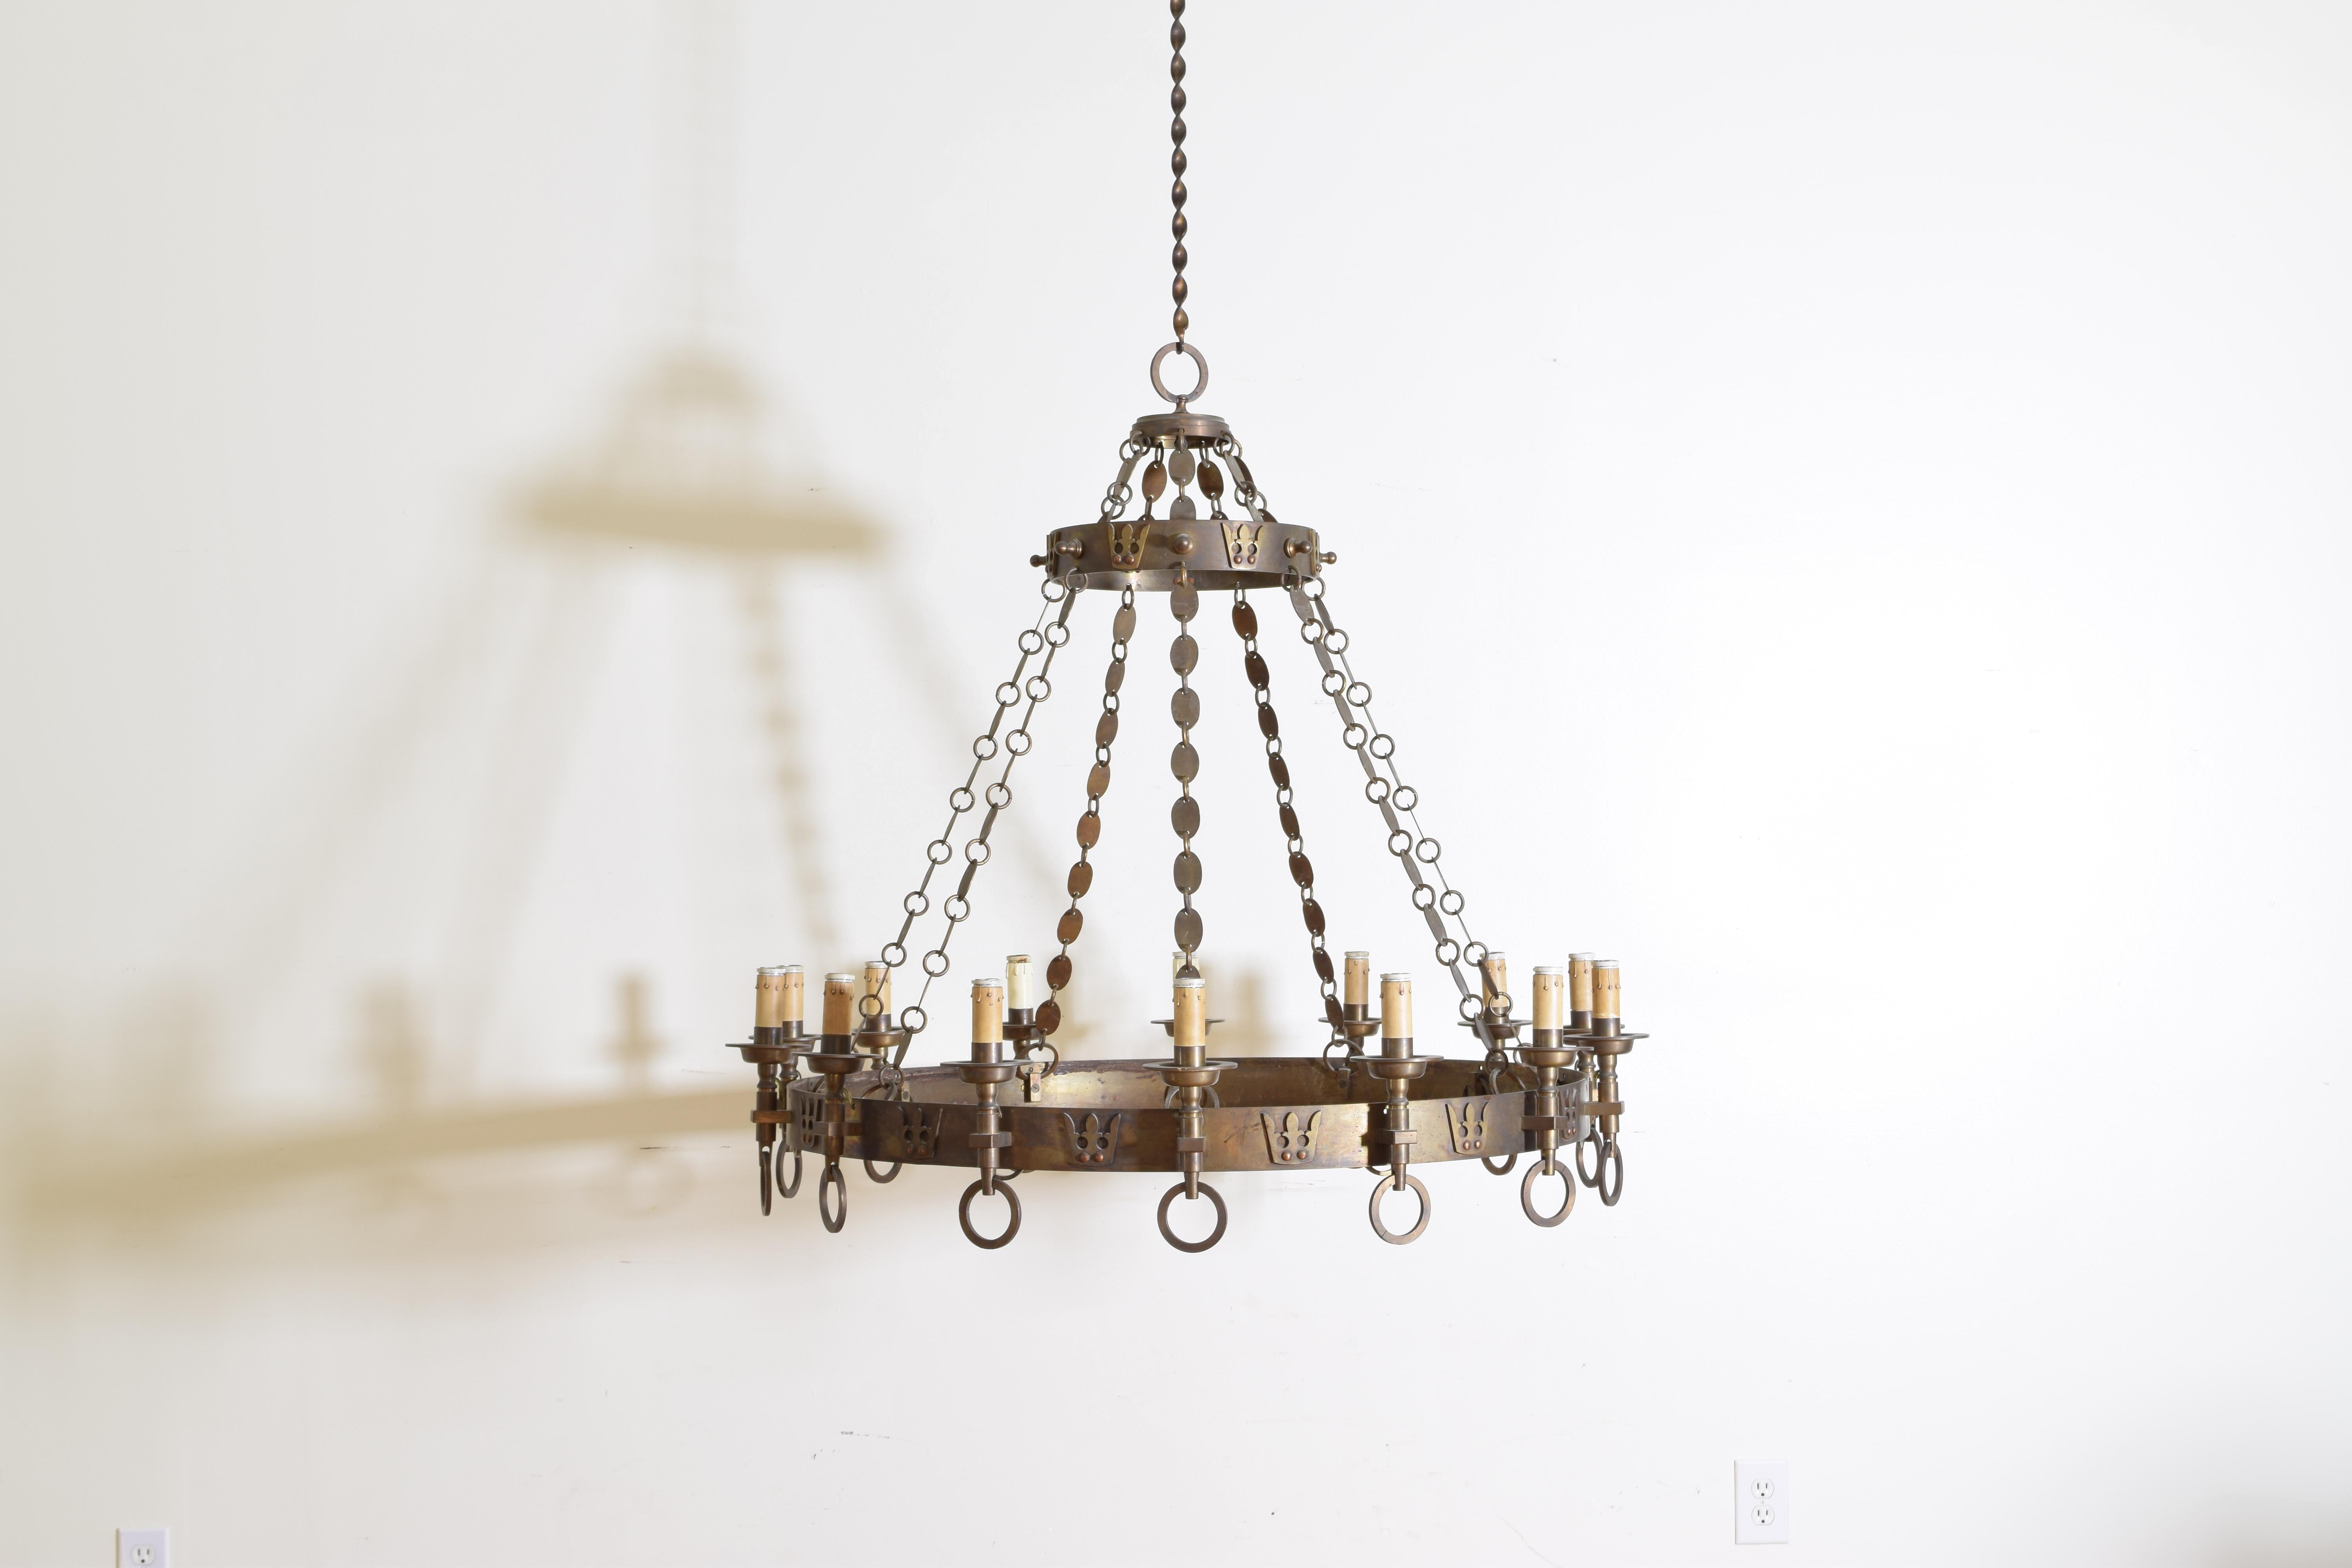 The chandelier having two concentric rings decorated with crowns, with 14 torcheres attached to the outers, the rings connected by oval brass disks.